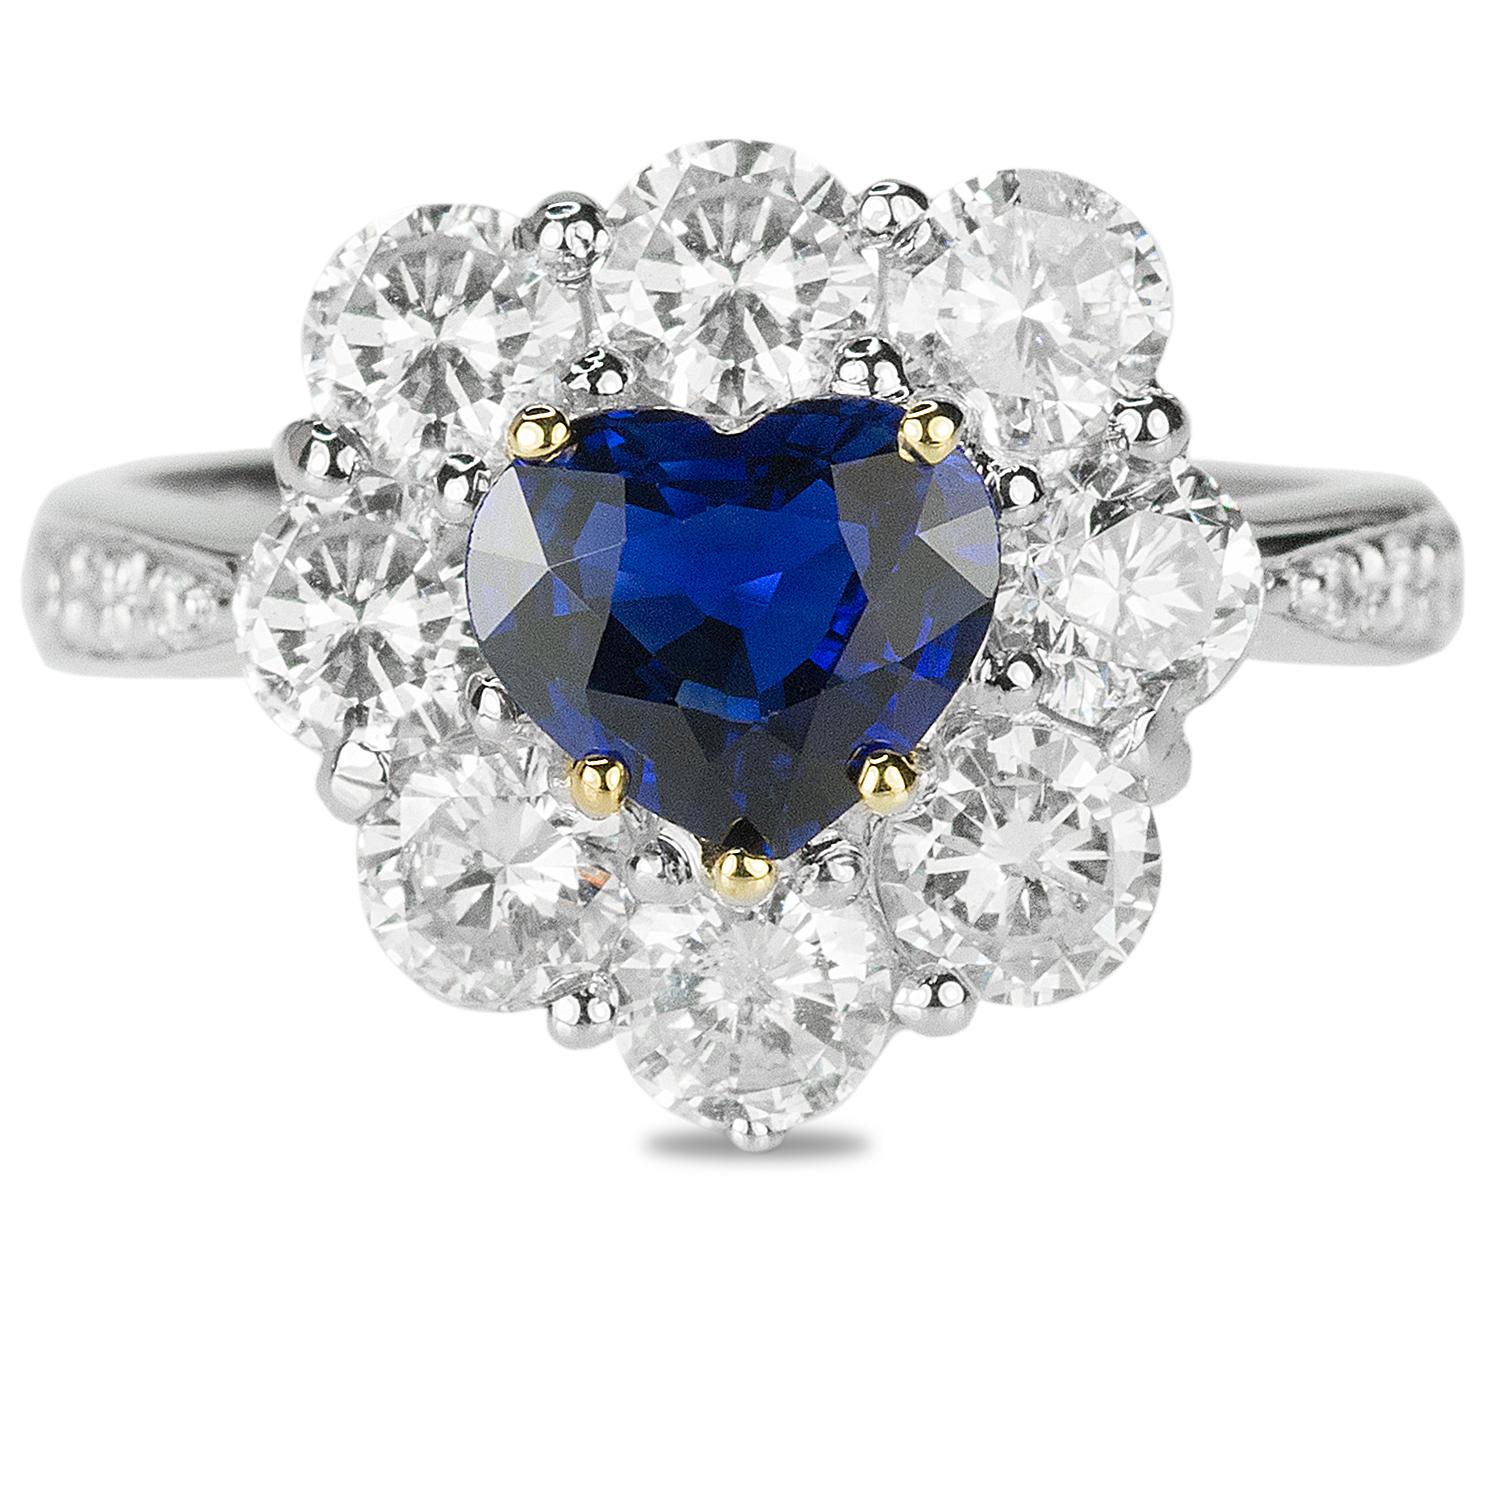 Platinum ring with GRS certified 0.99 carat unheated heart shape sapphire and 1.43 carats of collection color/clarity round brilliant diamonds. Complimentary expert ring sizing included.